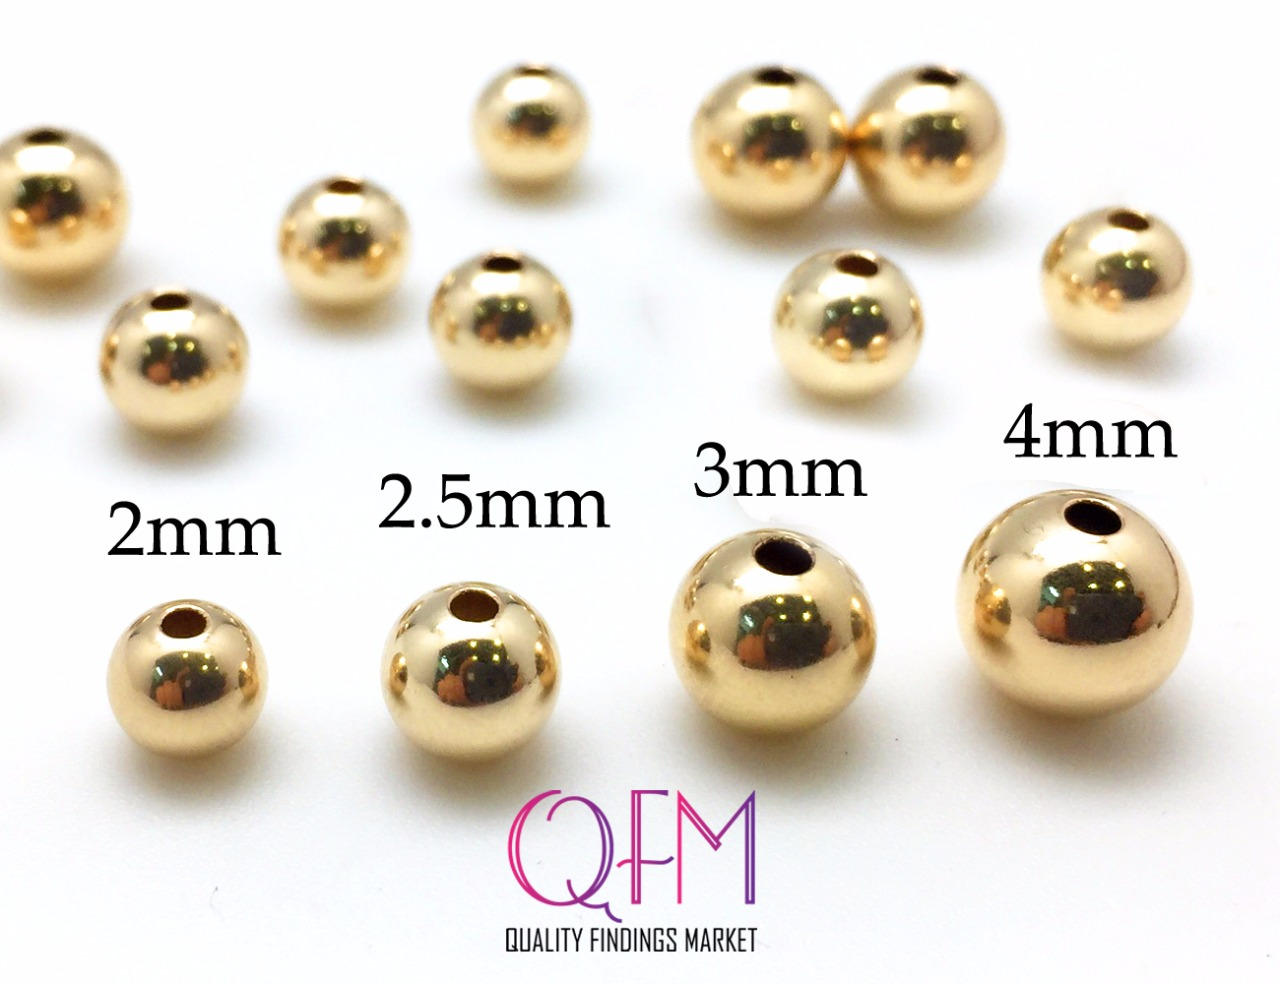 KEOOID TMIGOO 100pcs 14K 2mm Gold Filled Spacer Beads for Jewelry Making, 14K Gold Filled Round Beads 2mm Gold Beads